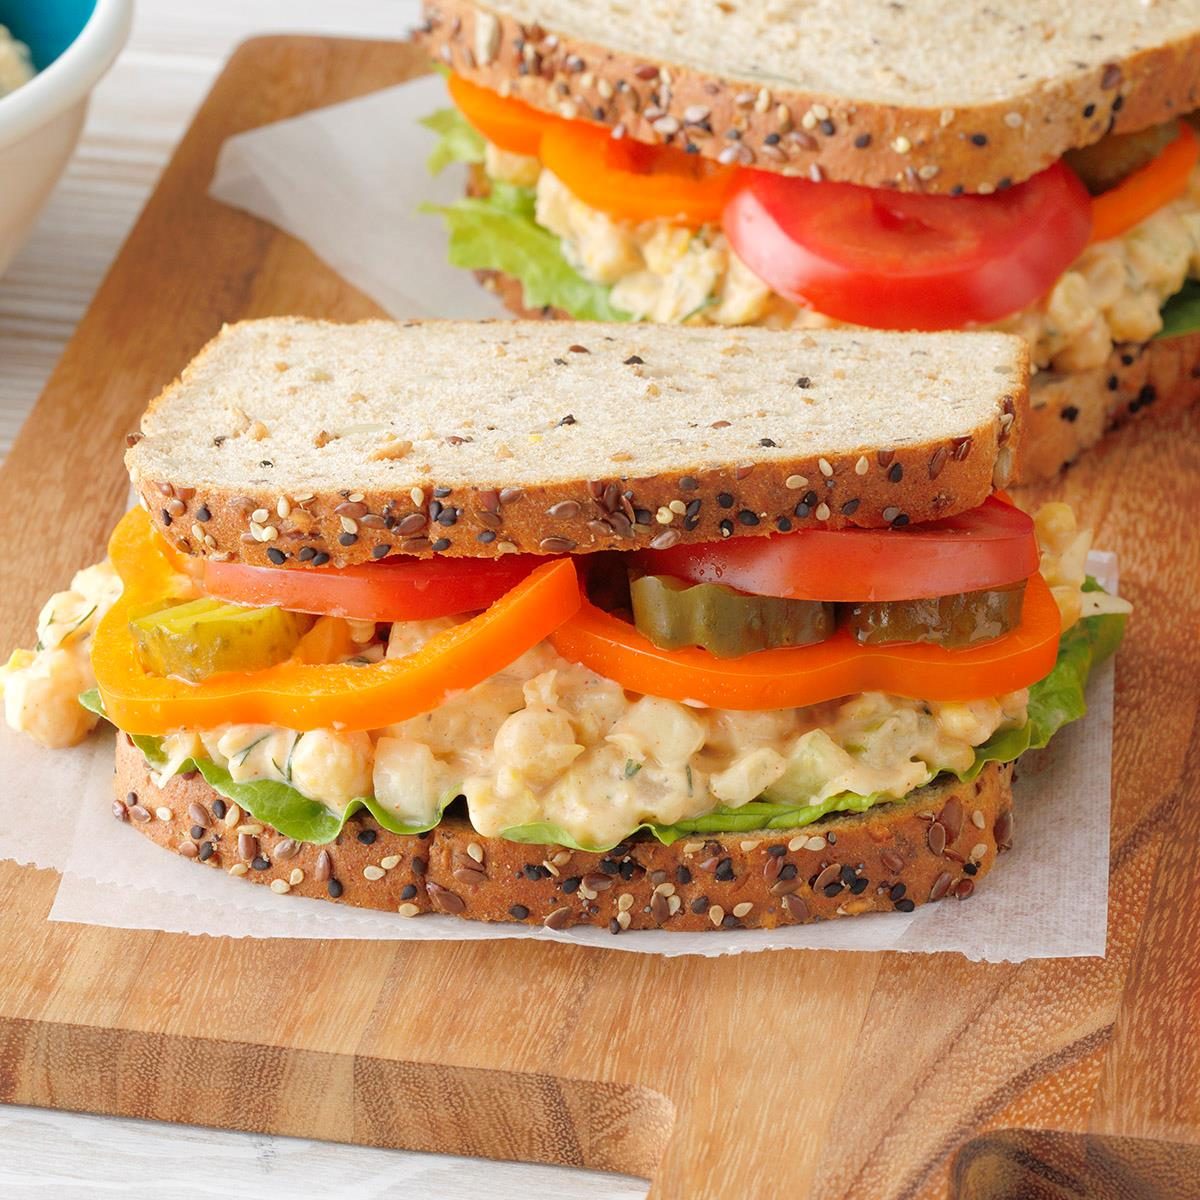 Dilly Chickpea Salad Sandwiches Recipe: How to Make It